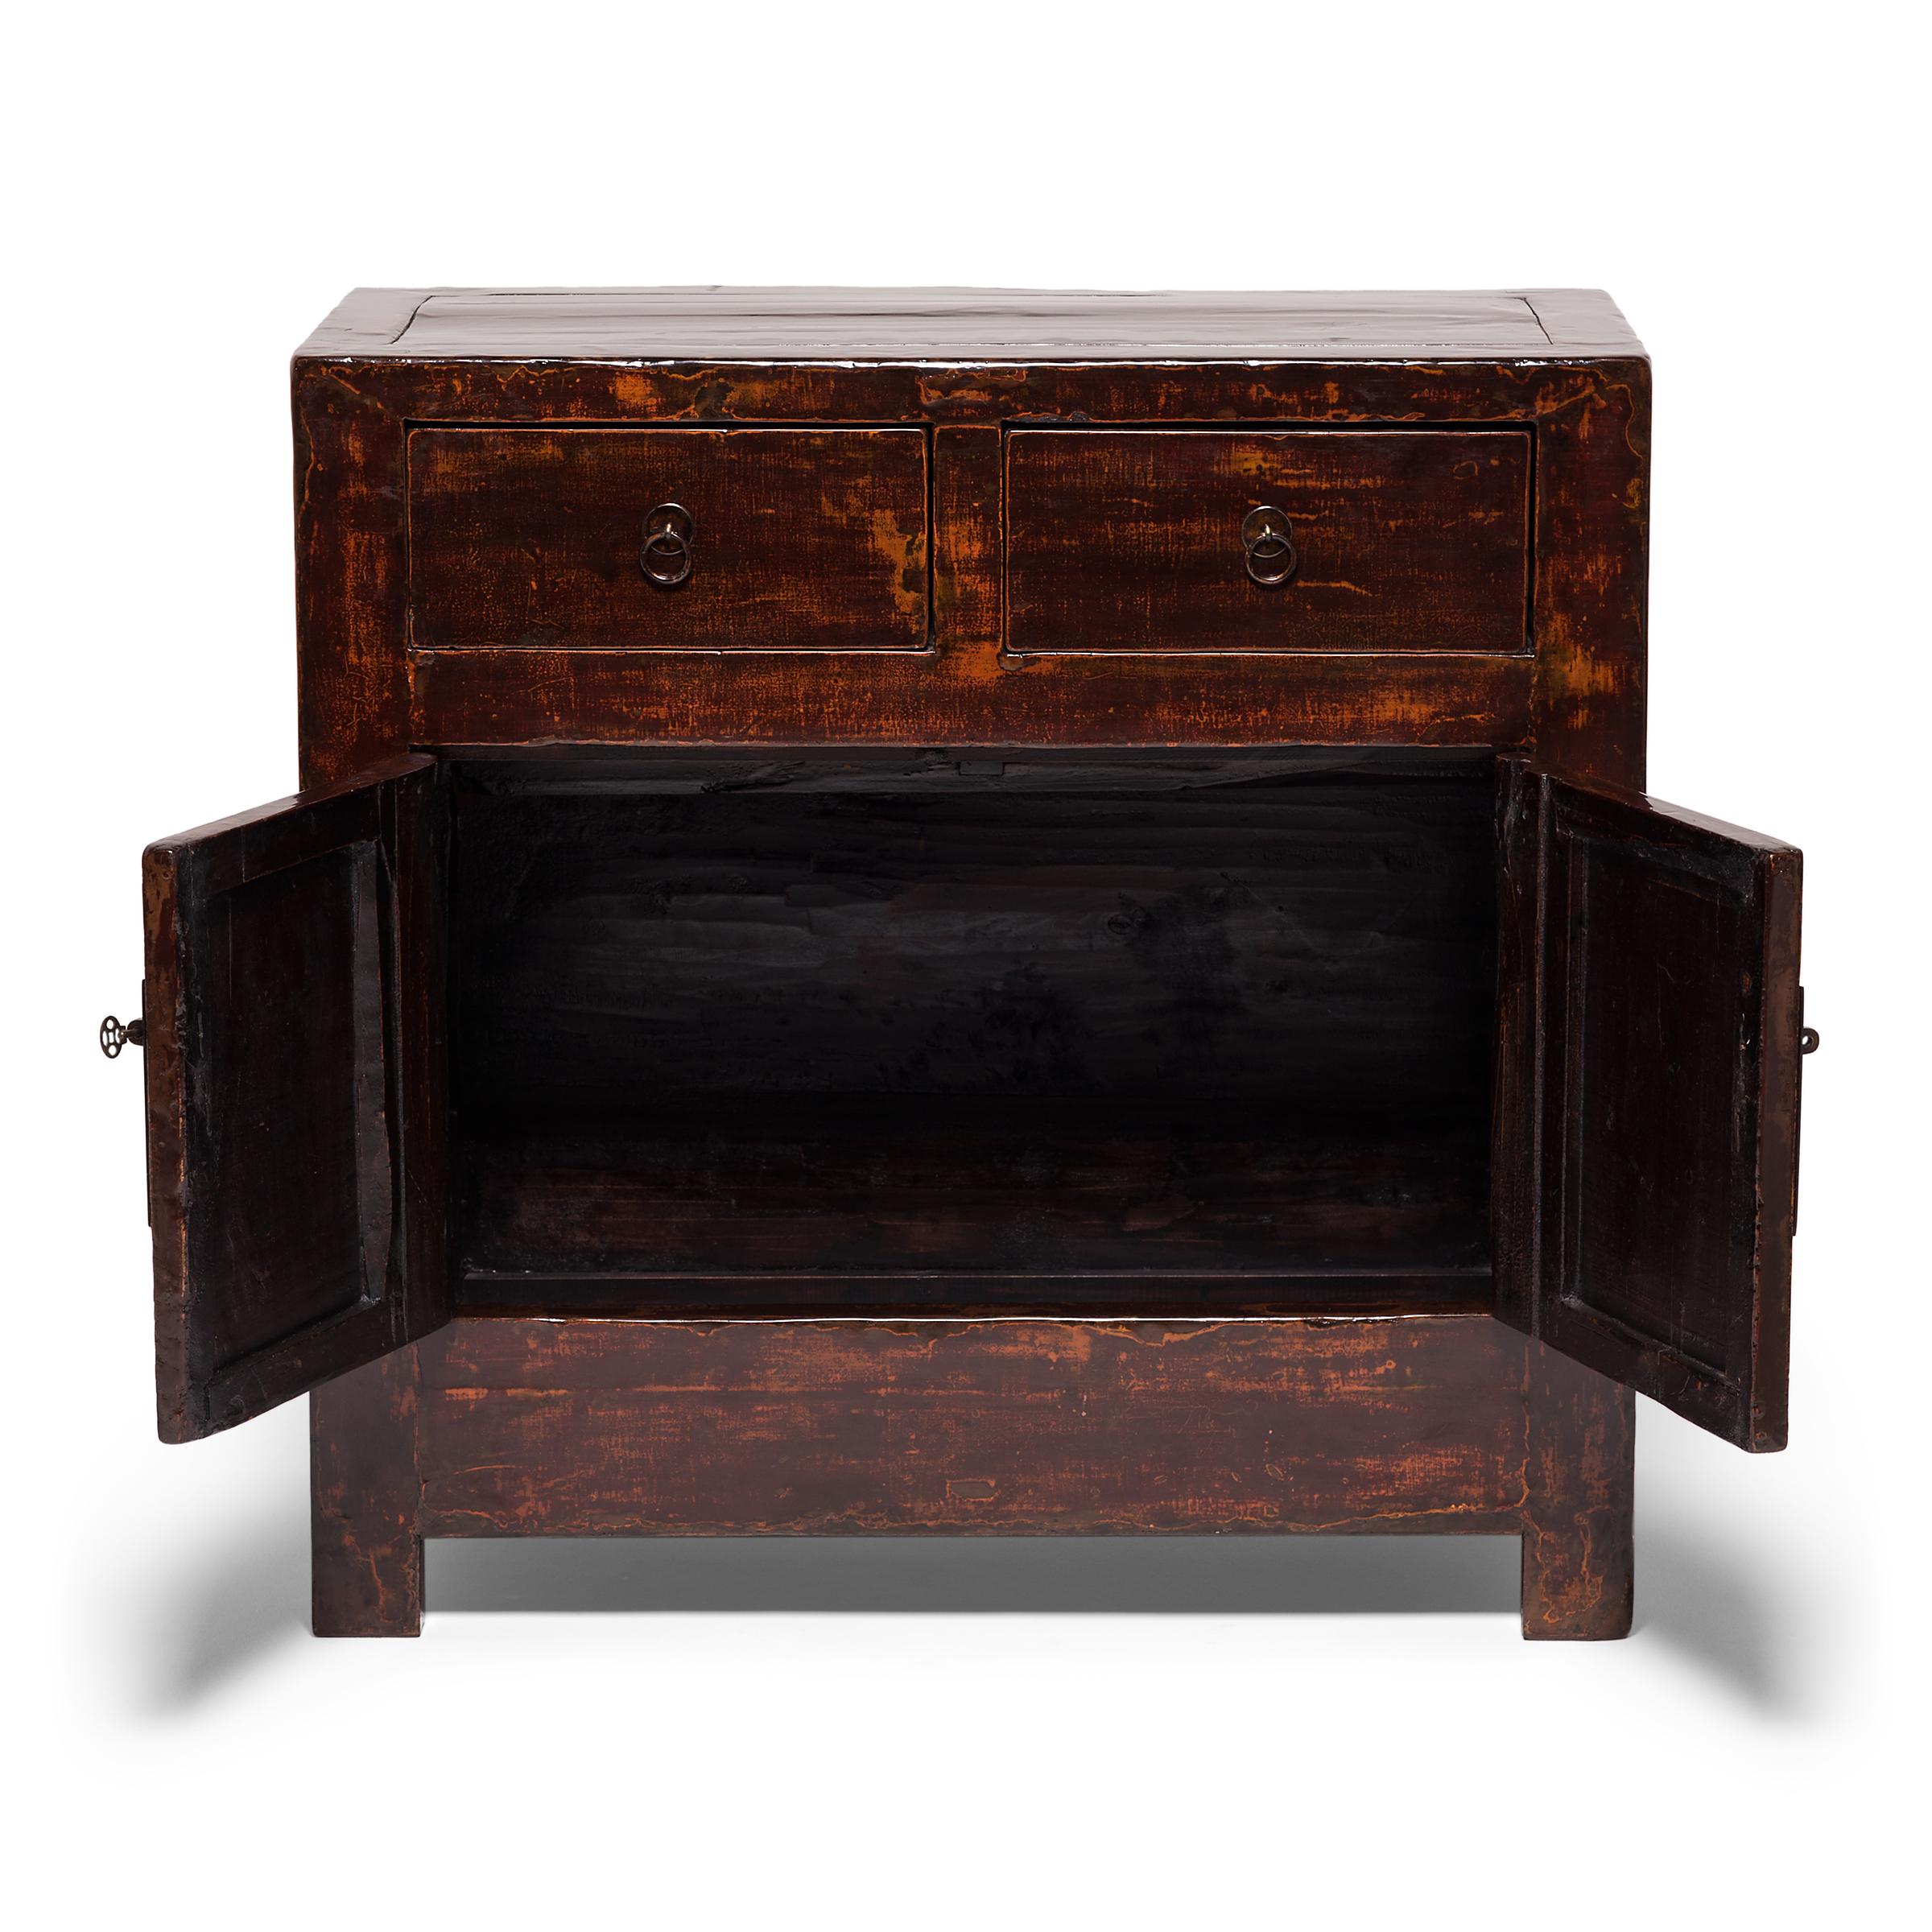 Over century and a half ago, an craftsperson from China’s Anhui province constructed this chest of the finest elmwood. At first glance it has a beautiful simplicity, but subtle details make this chest particularly striking. The brass hardware is